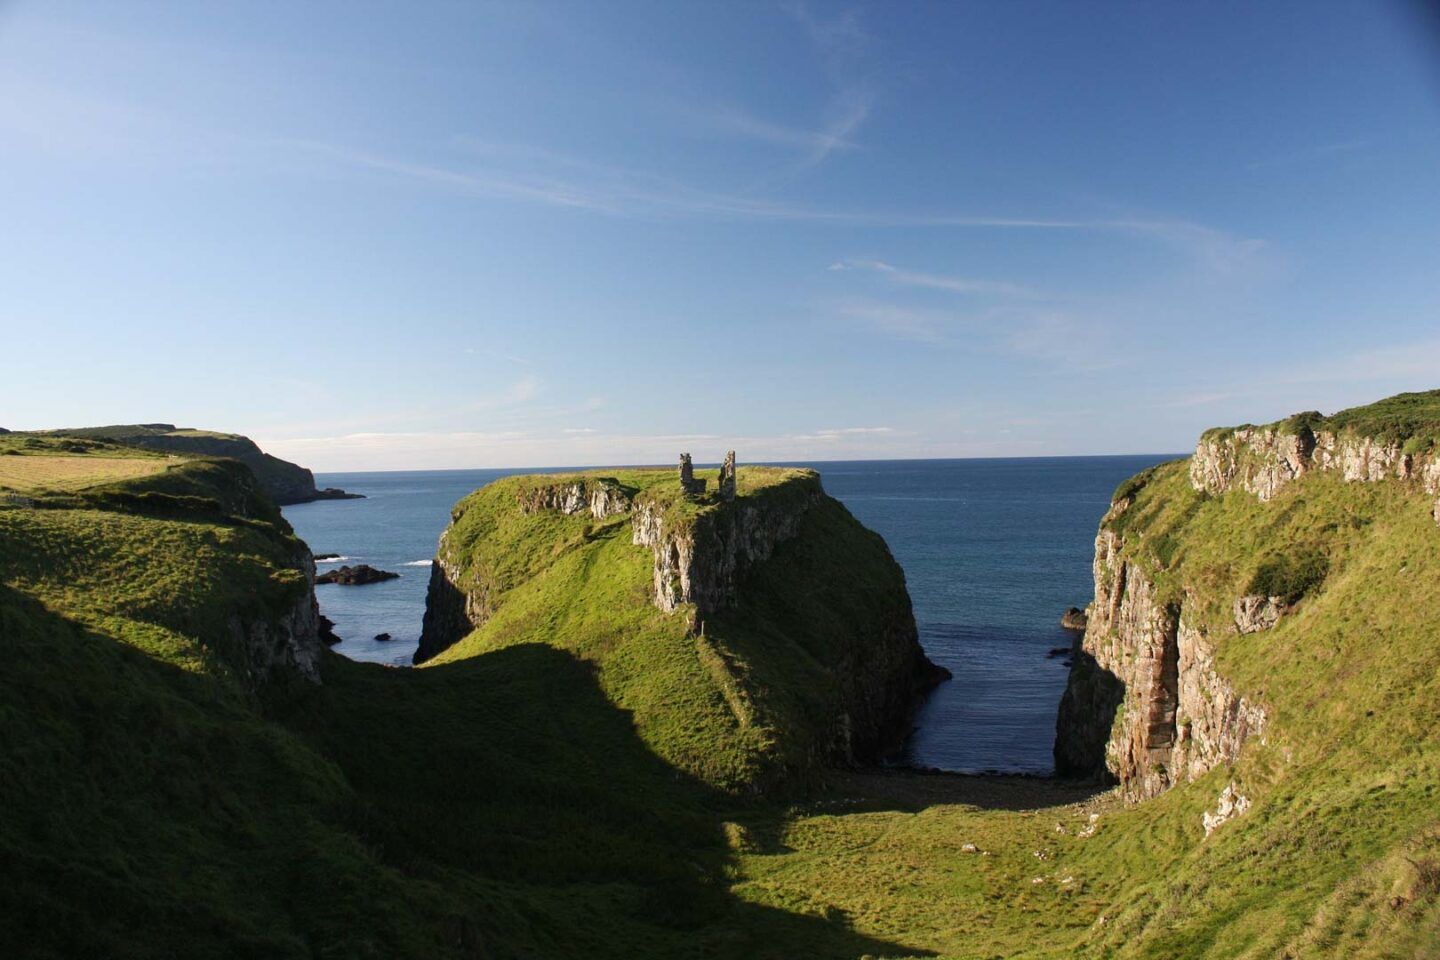 Dunseverick Castle in Northern Ireland